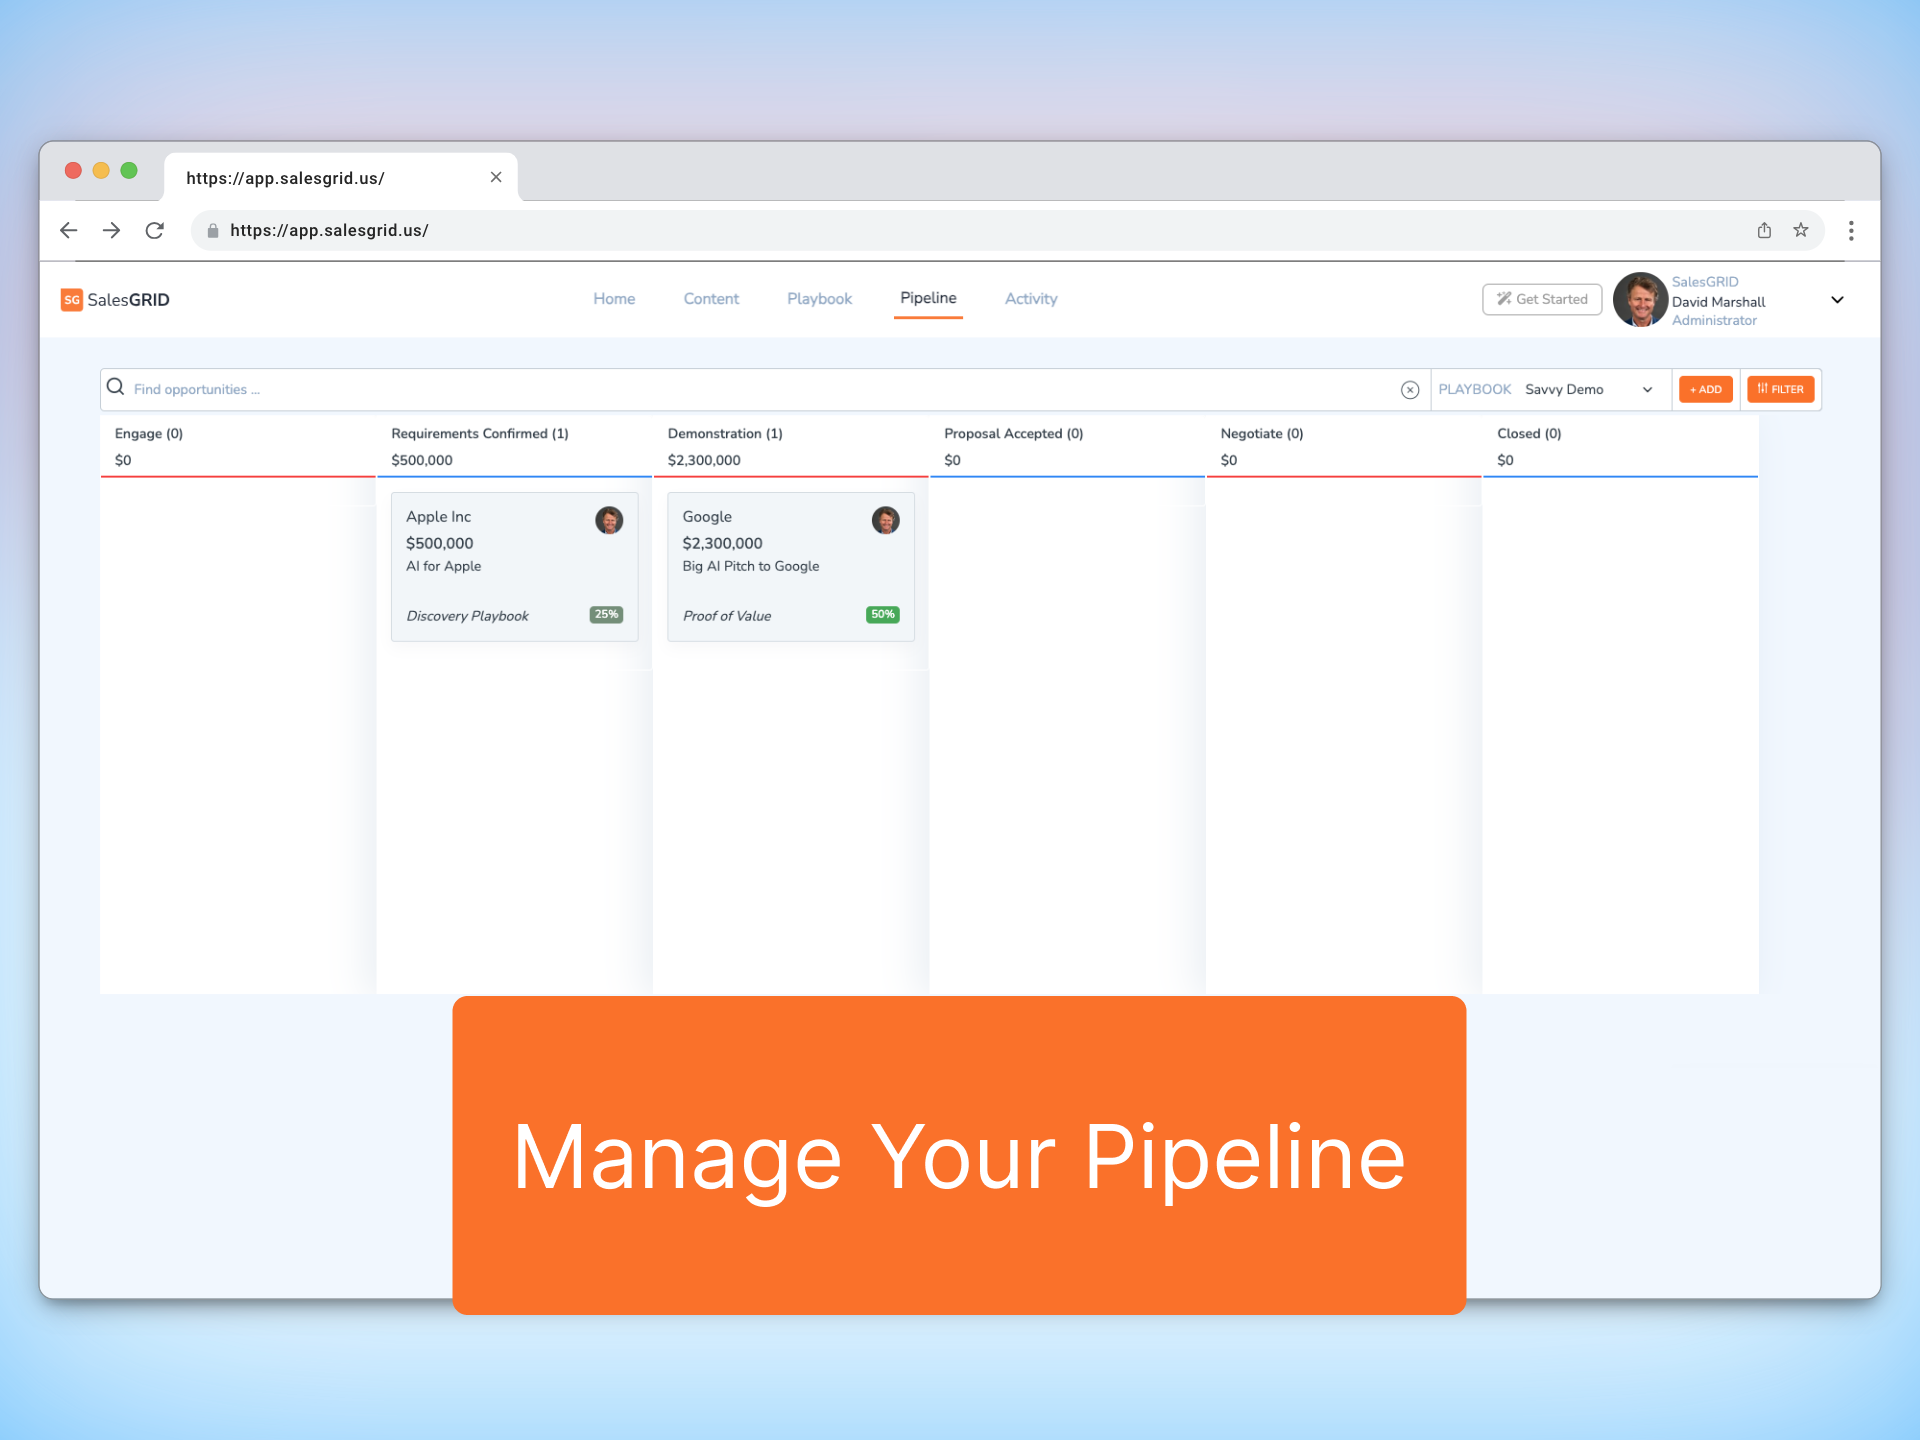 Manage Your Pipeline